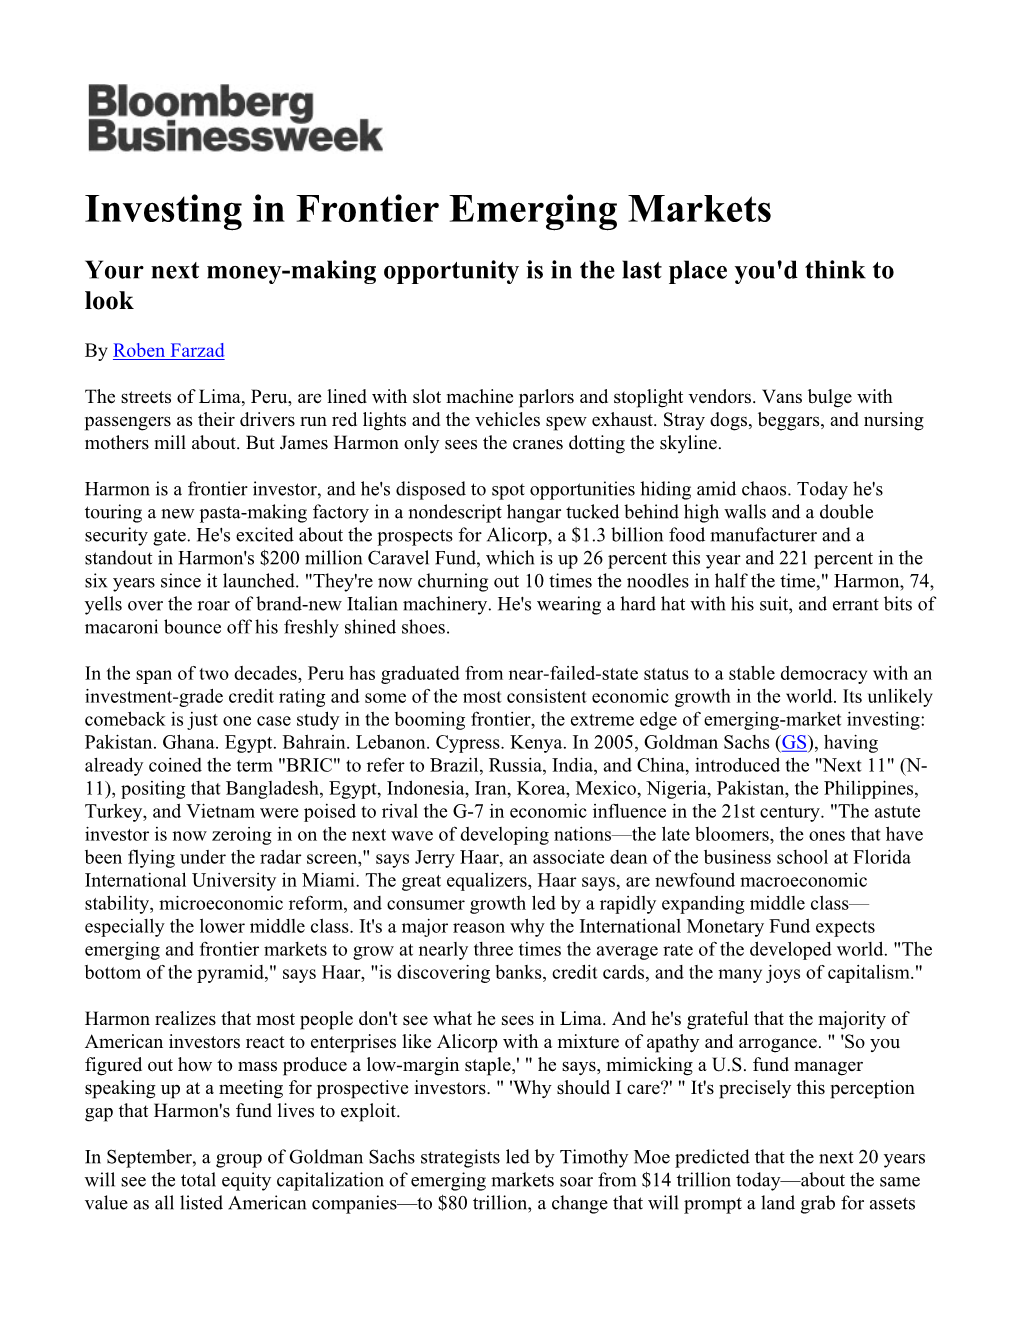 Investing in Frontier Emerging Markets